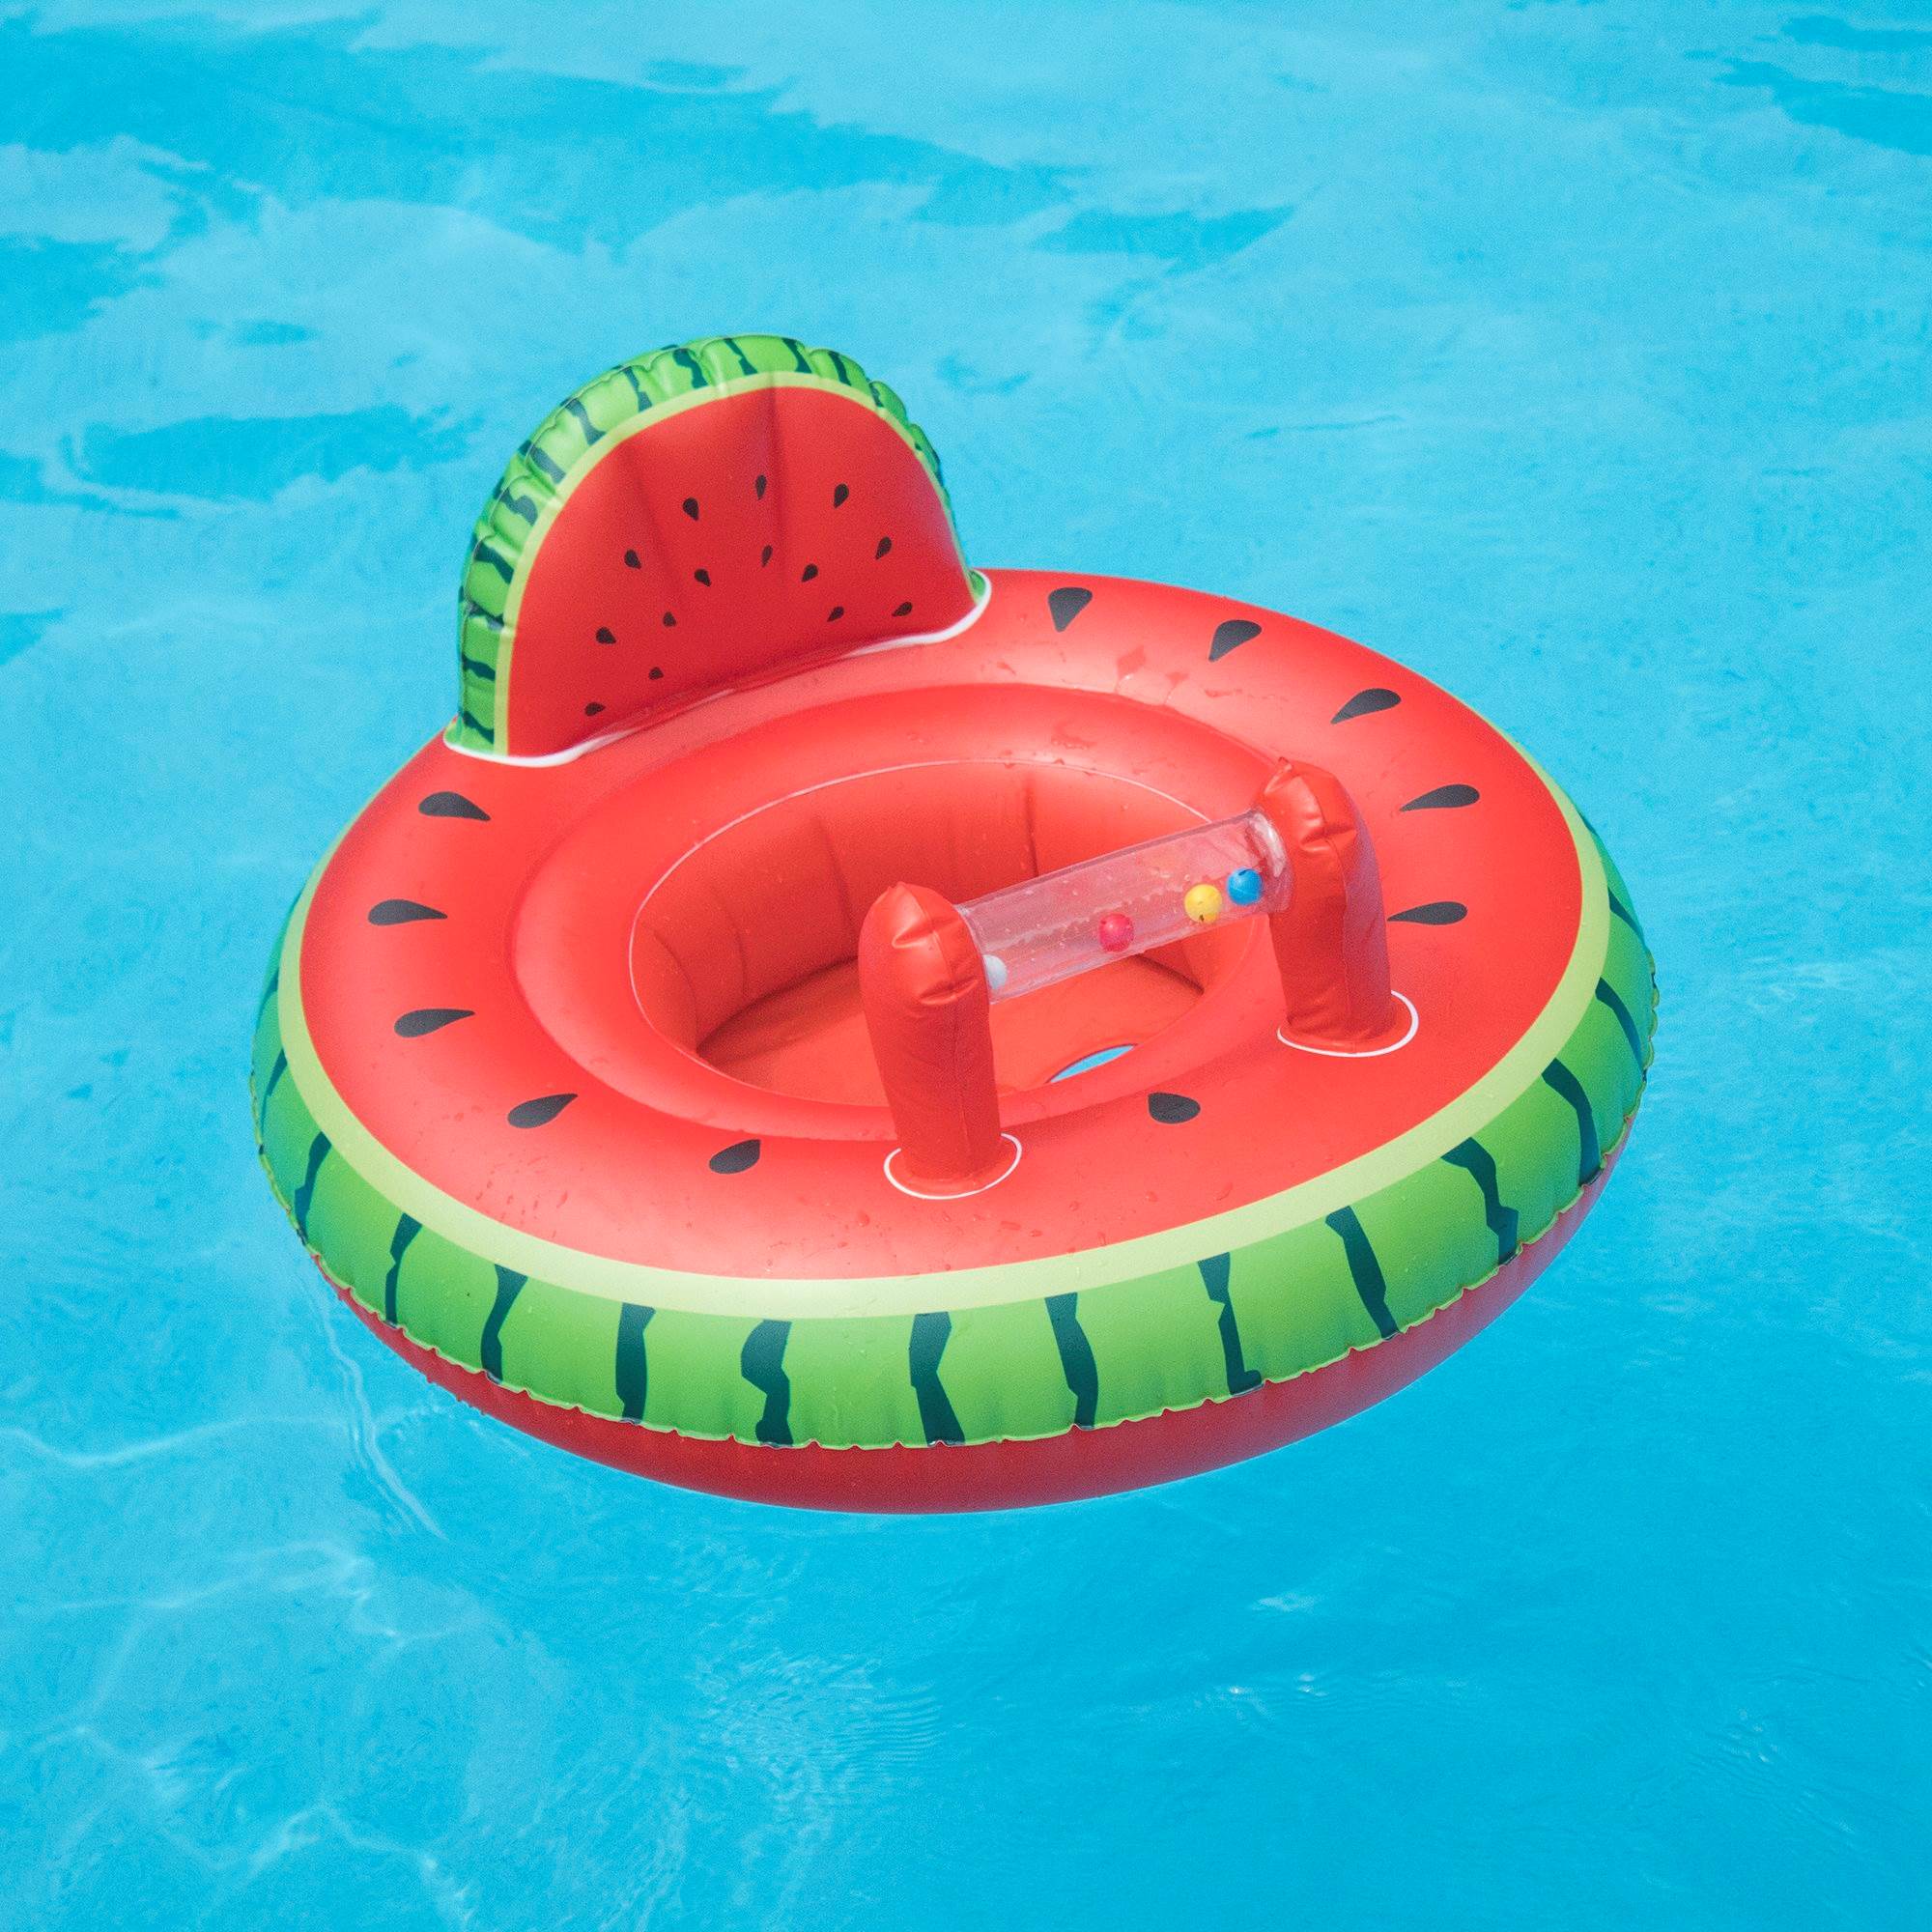 Swimline Watermelon Baby Seat Pool Inflatable Ride-On, Red, Green - image 3 of 5